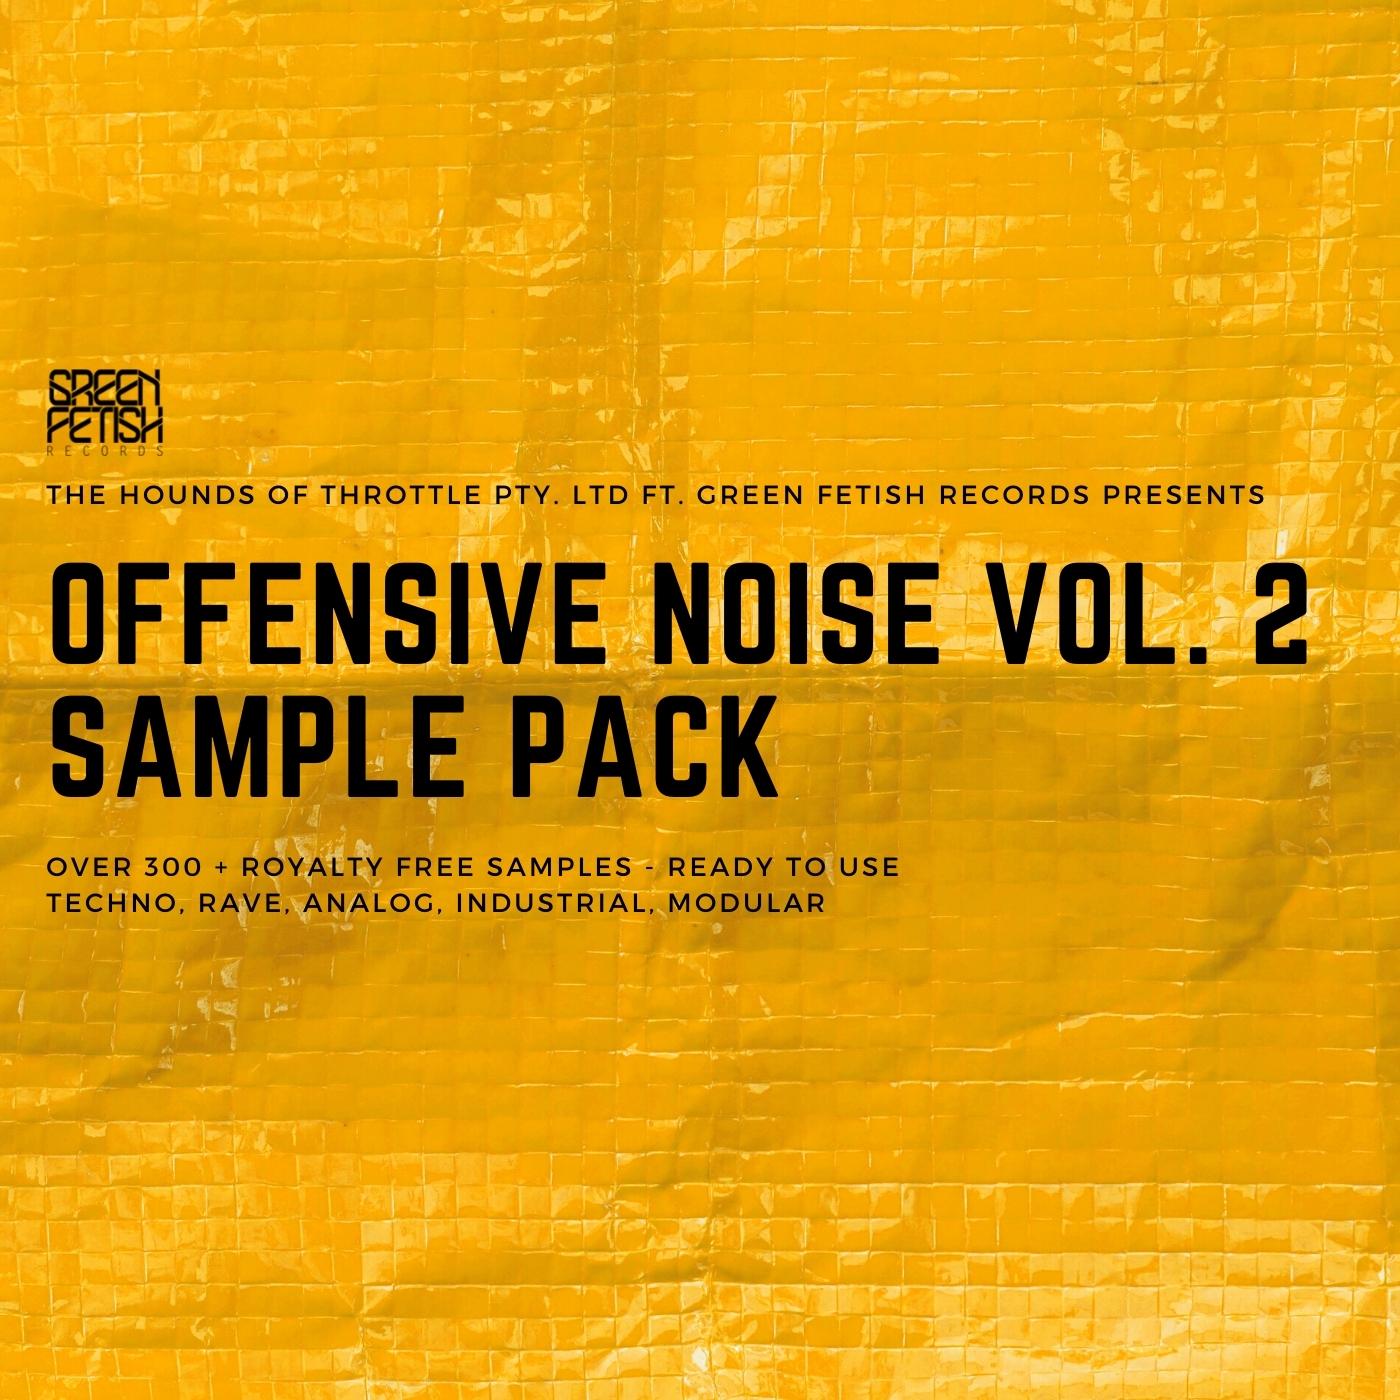 Green Fetish Records - Offensive Noise Vol.2